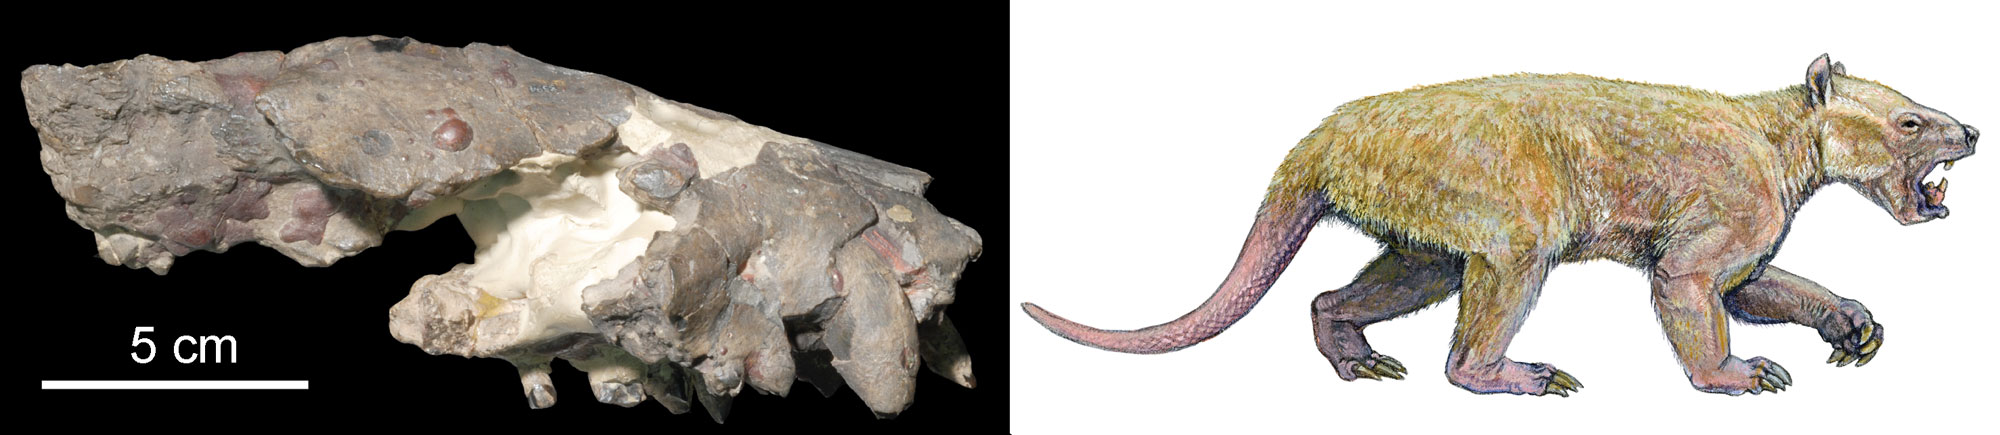 2-Panel image fo the mammal Wortmania from the Paleocene of New Mexico. Panel 1: Photo of the top of the skull from the side; large teeth can be seen. Panel 2: Reconstruction of the living animal showing a stout, 4-legged creature with long teeth, small ears, a strangely square jaw, and a long, hairless tail. The feet have long claws.